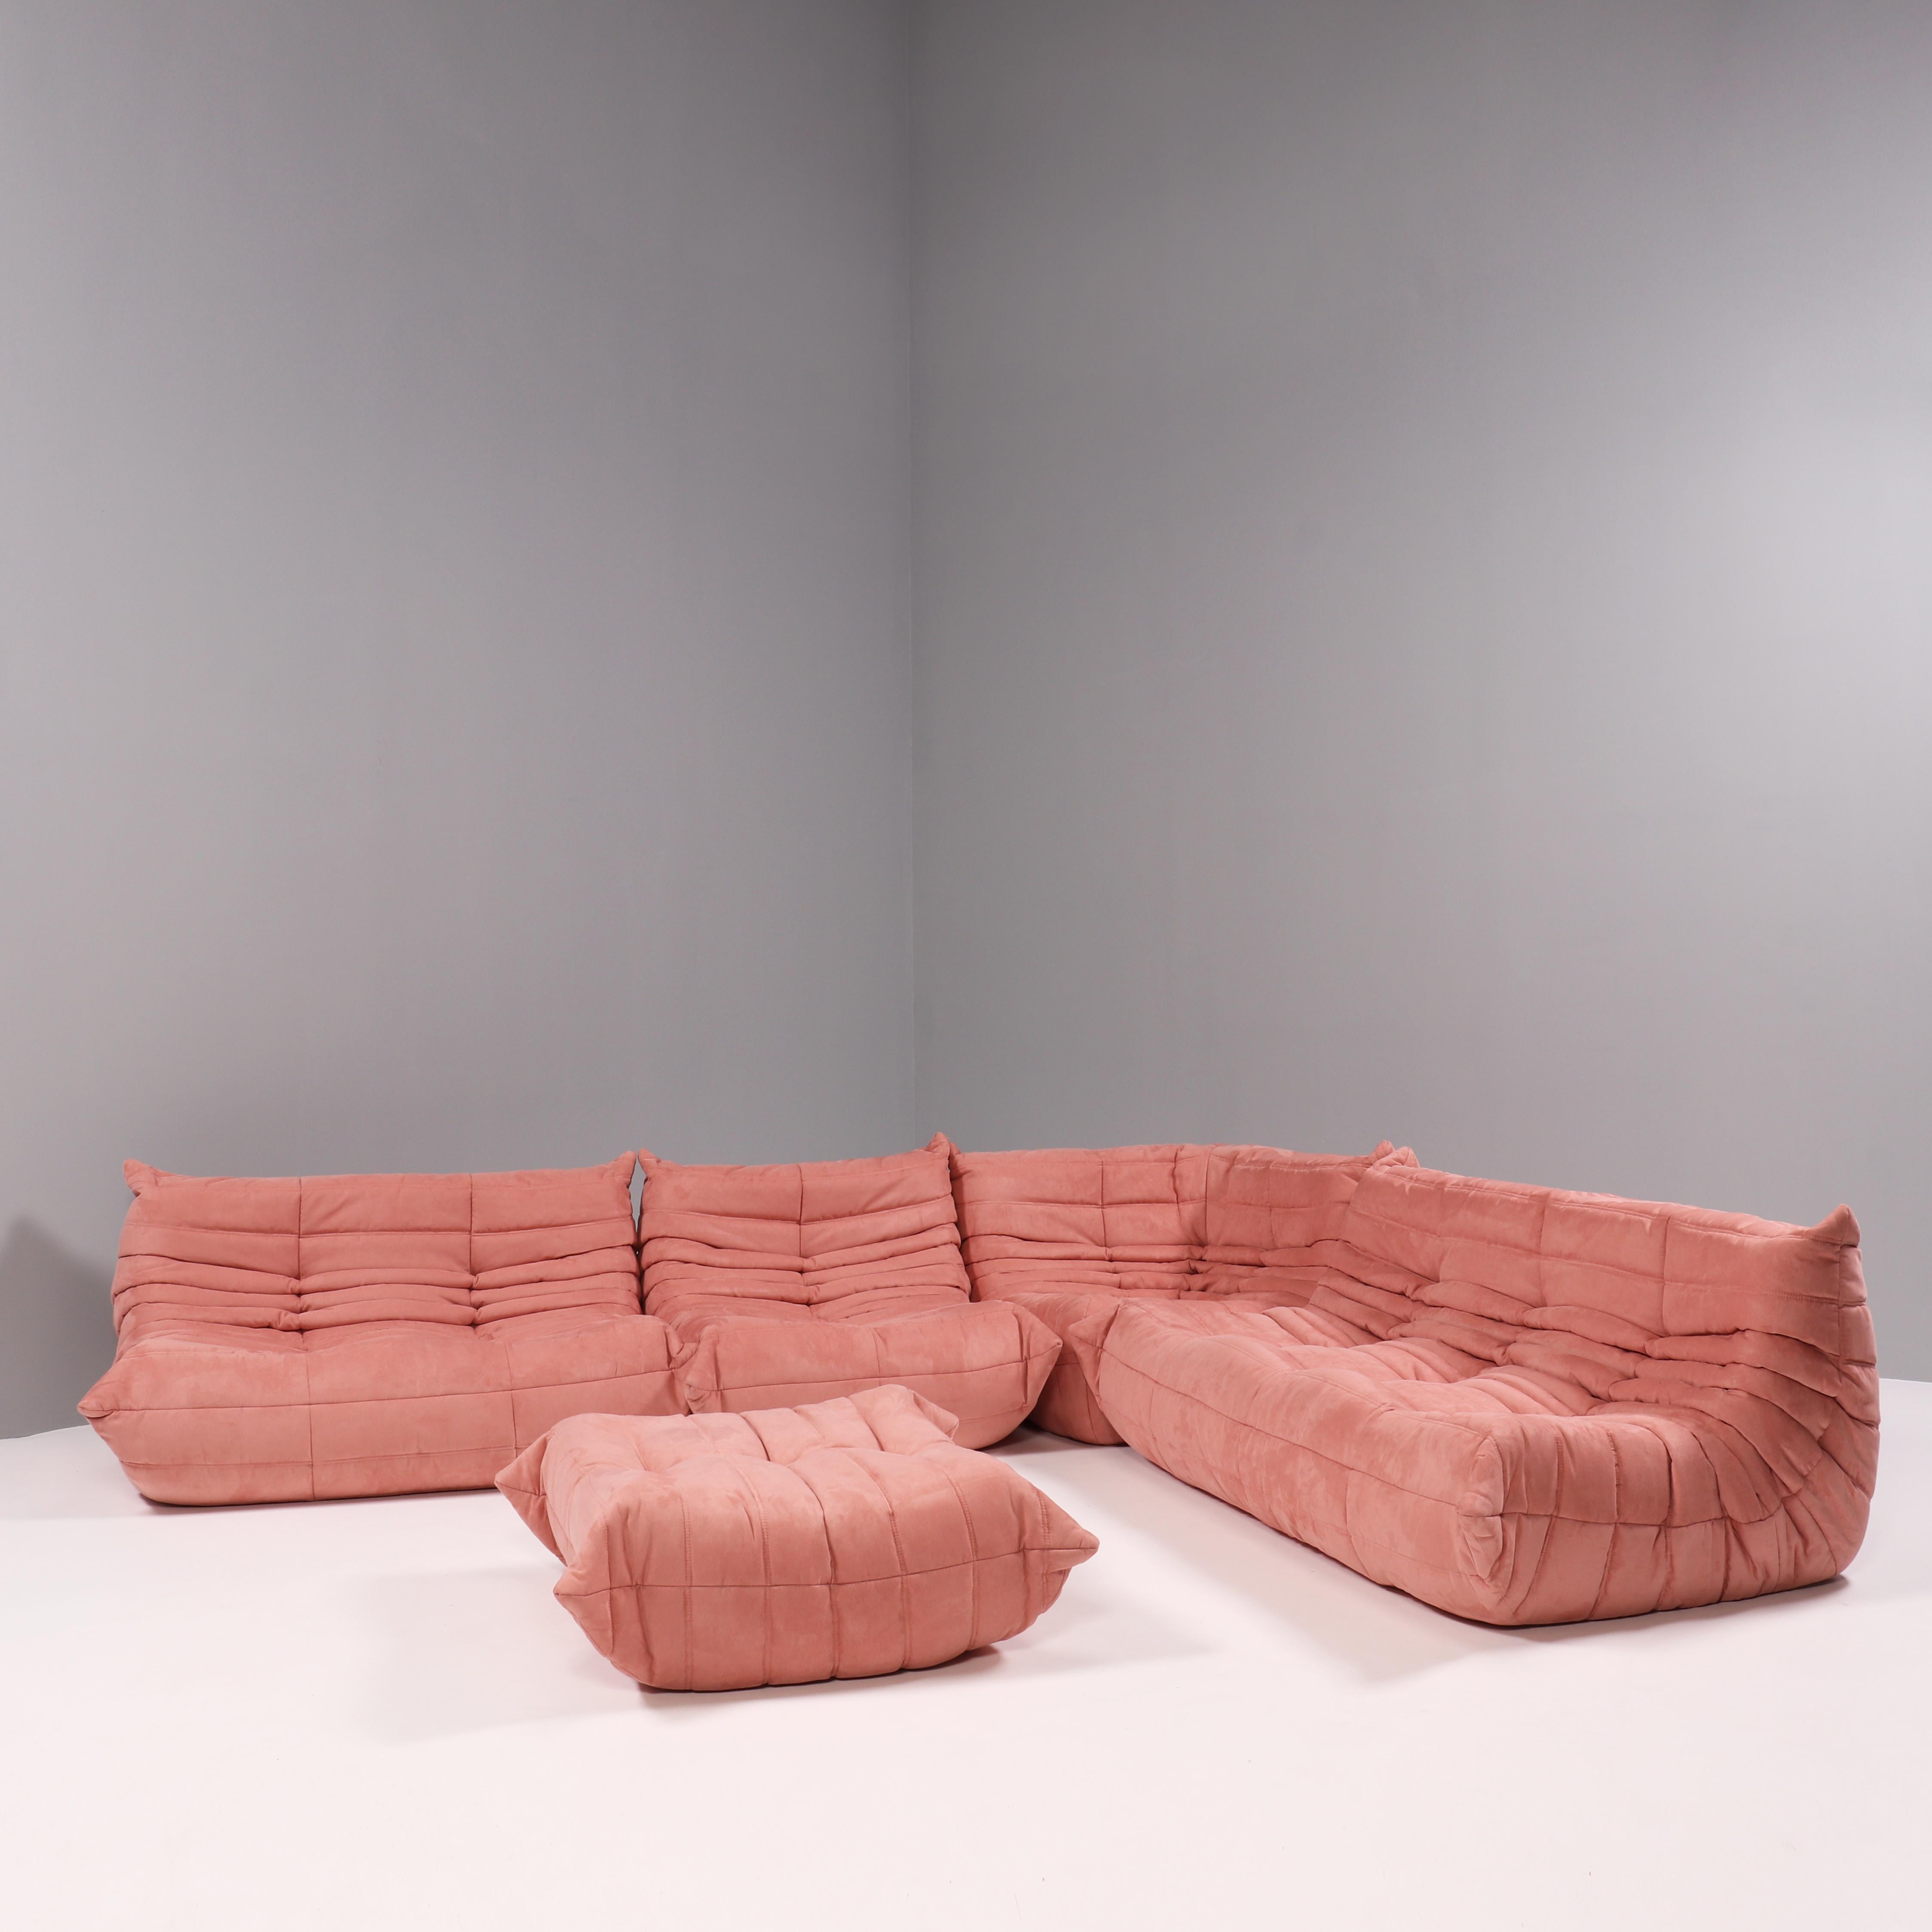 The iconic Togo sofa, originally designed by Michel Ducaroy for Ligne Roset in 1973 has become a design Classic.

This five-piece modular set is incredibly versatile and can be configured into one large corner sofa or split for a multitude of